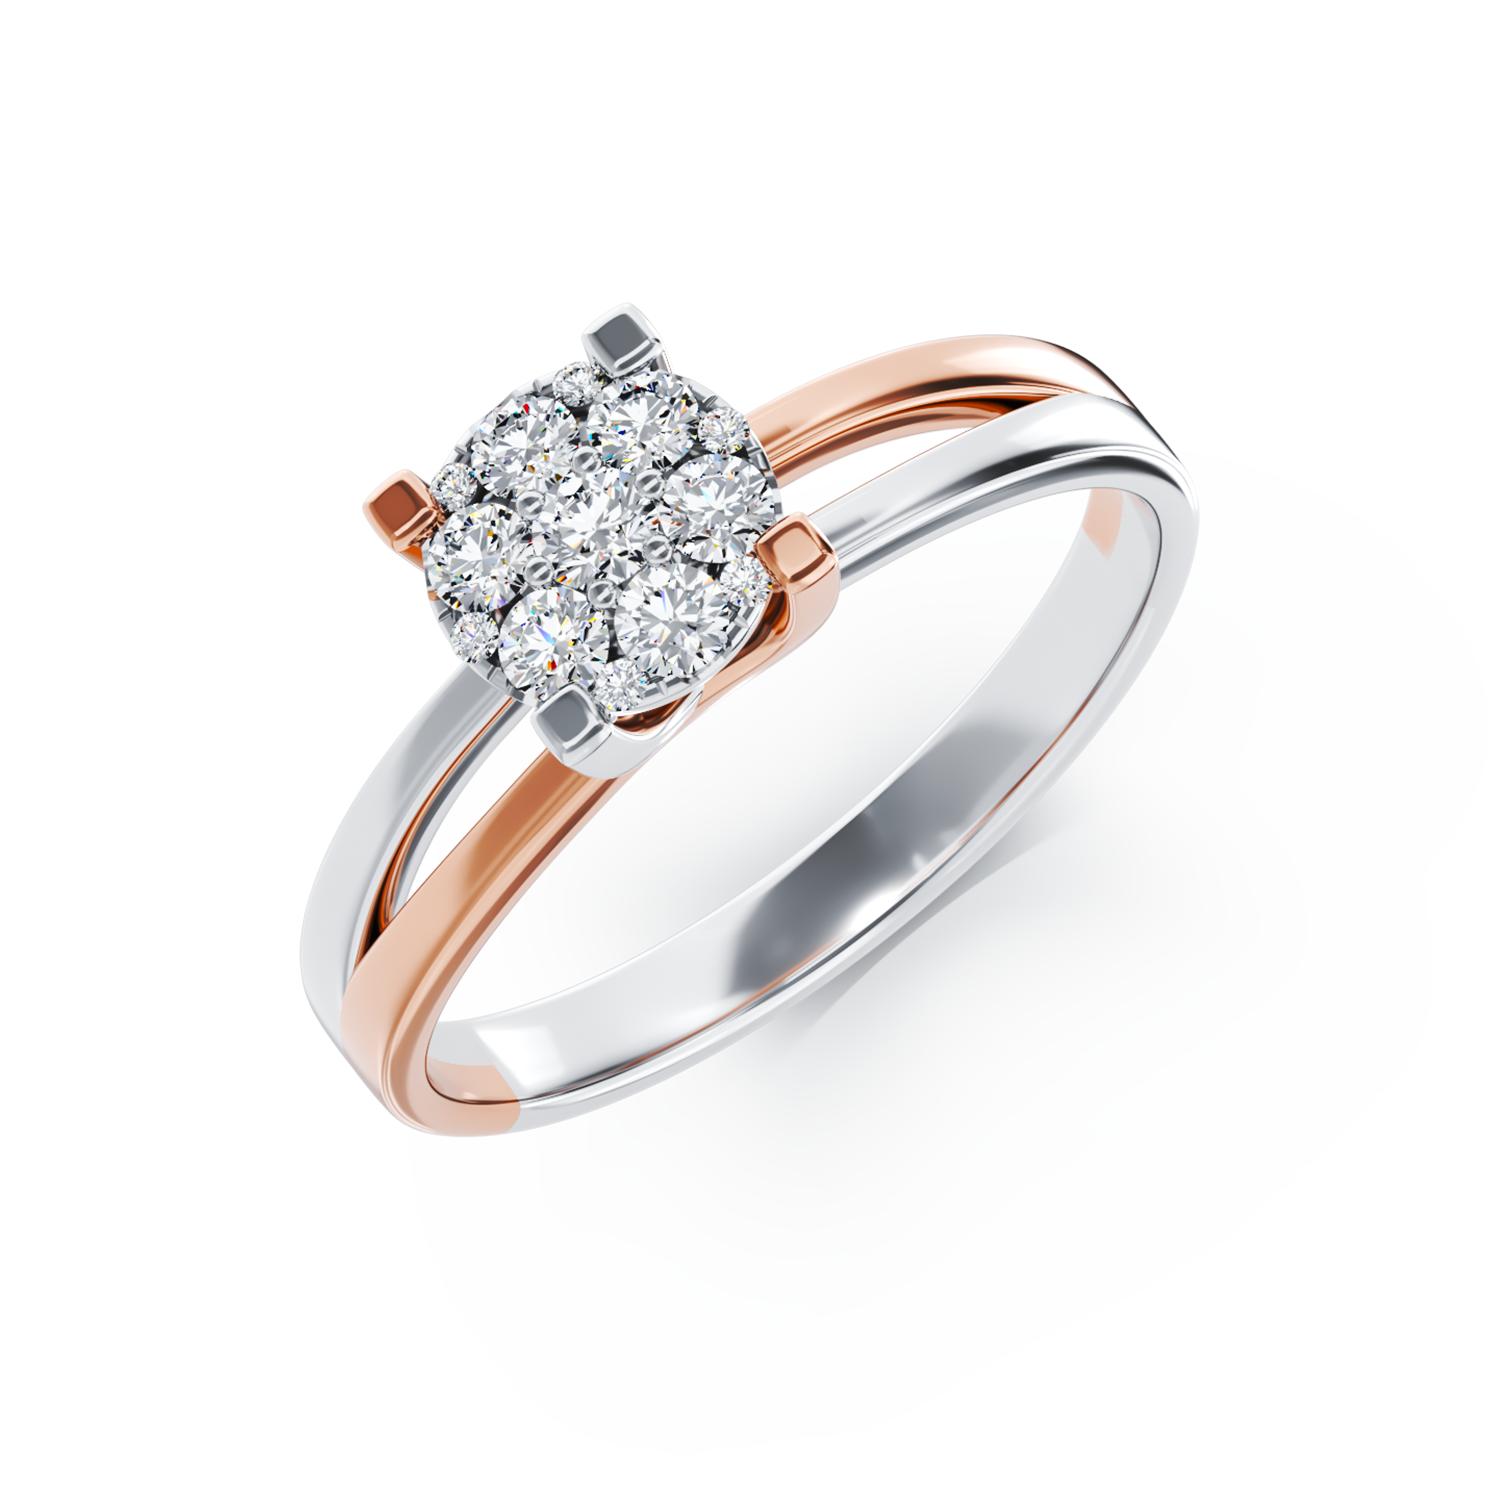 18K white-rose gold engagement ring with diamonds of 0.24ct